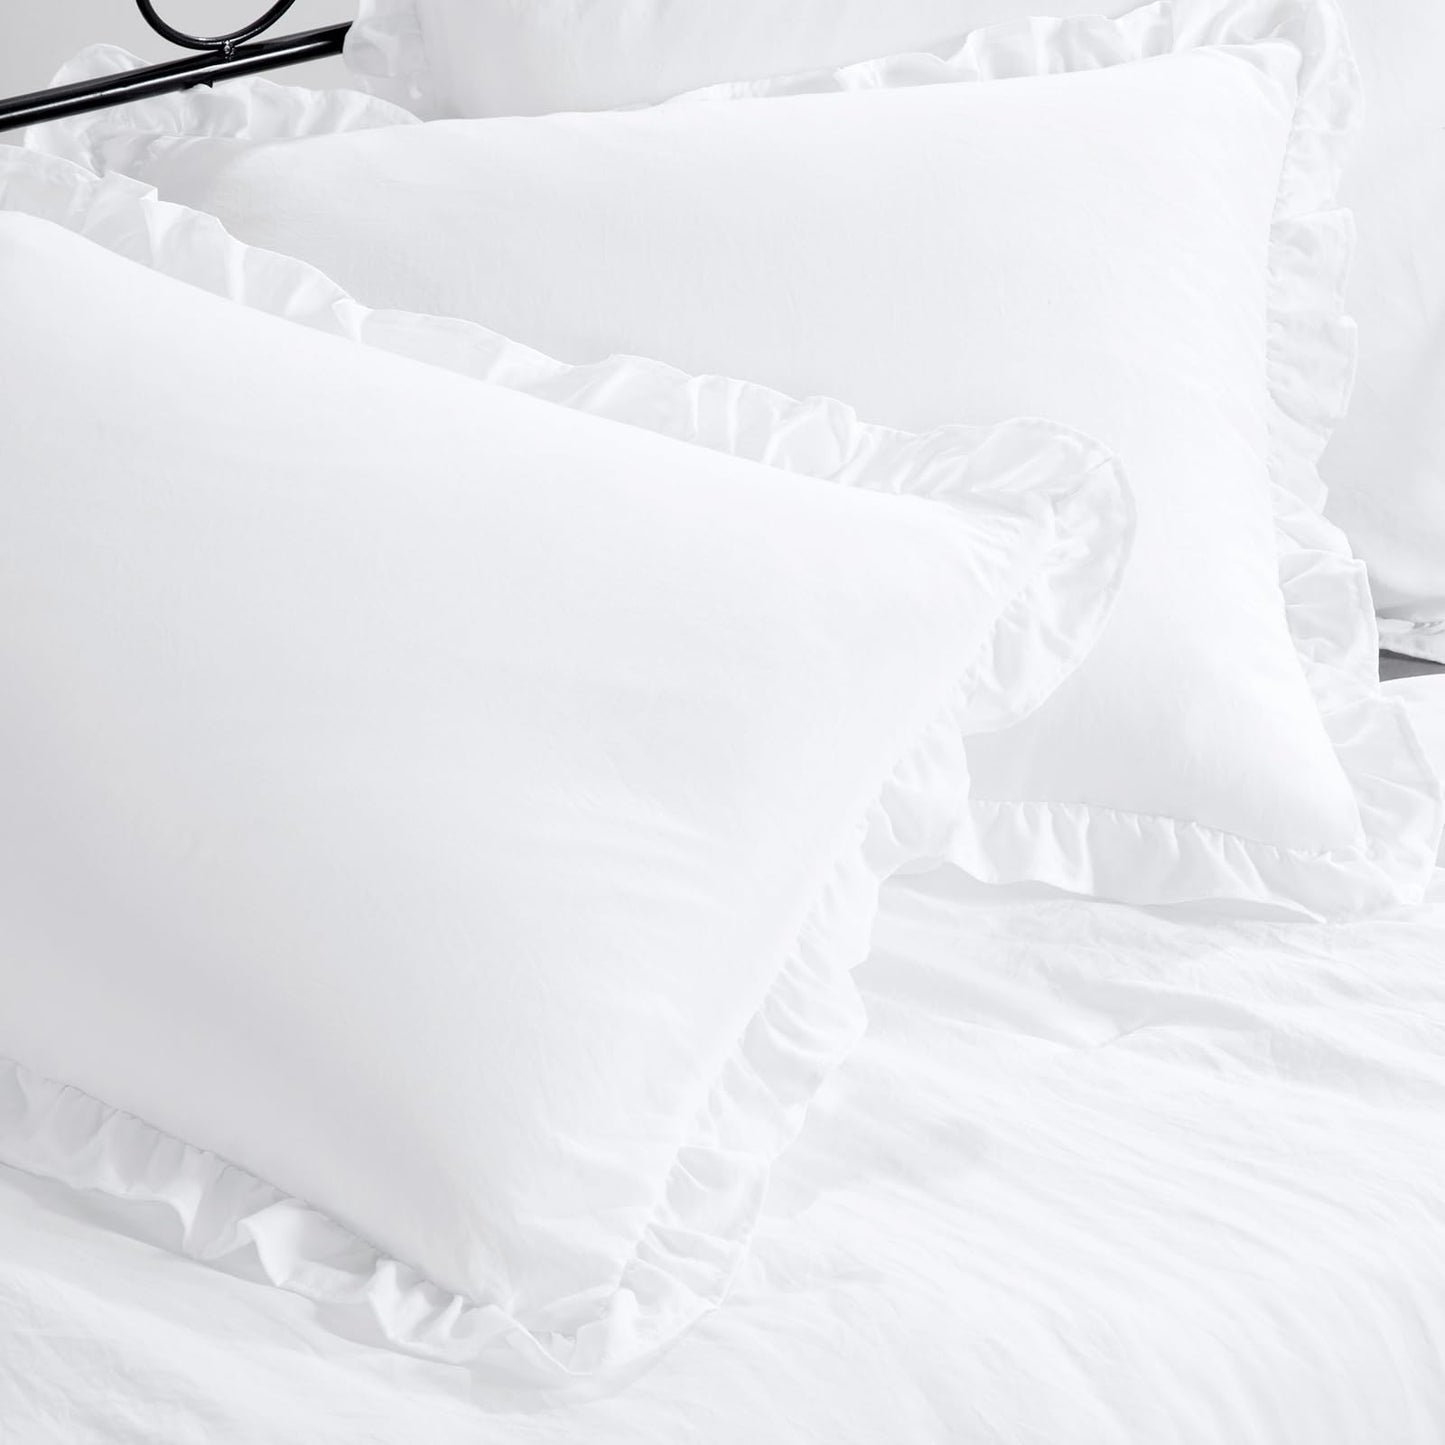 HOMBYS 5 Pieces Thicker Ruffled Daybed Set Twin Size, Daybed Comforter Set for All Season Cozy and Soft, Daybed Cover Fluffy Comforter with Bed Skirt and Shams - 75 x39 - Pure White